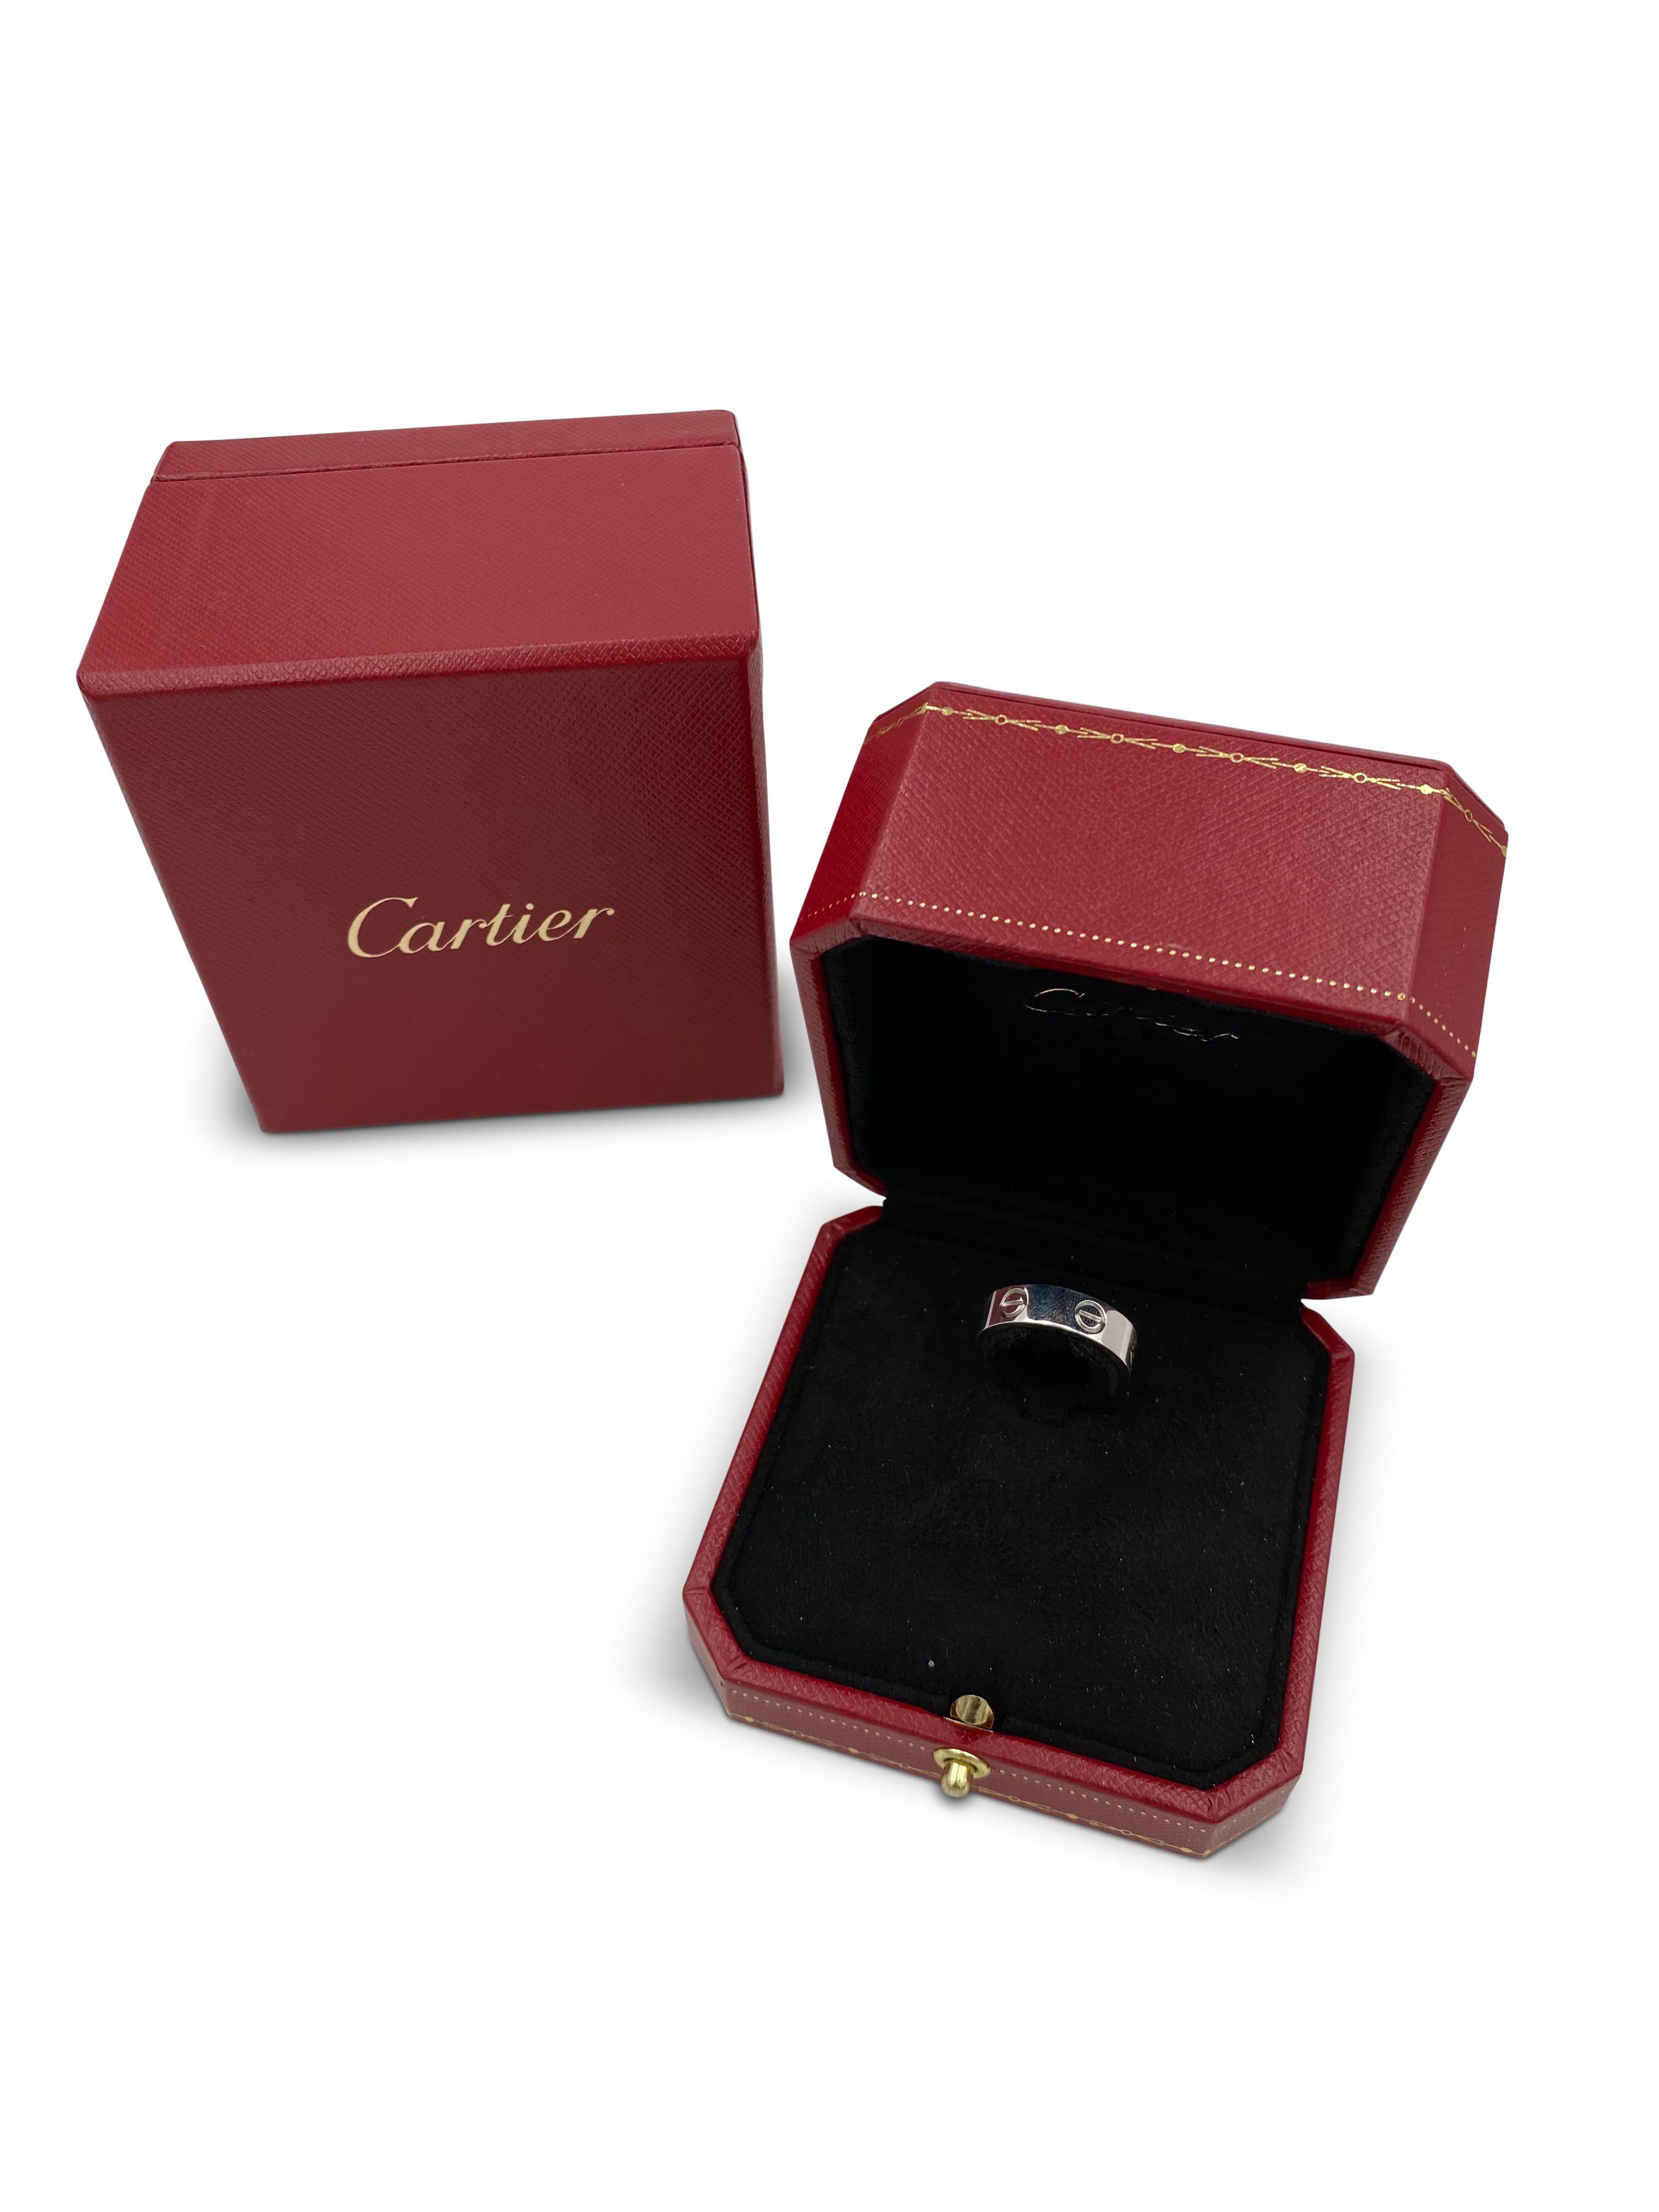 cartier love ring white gold